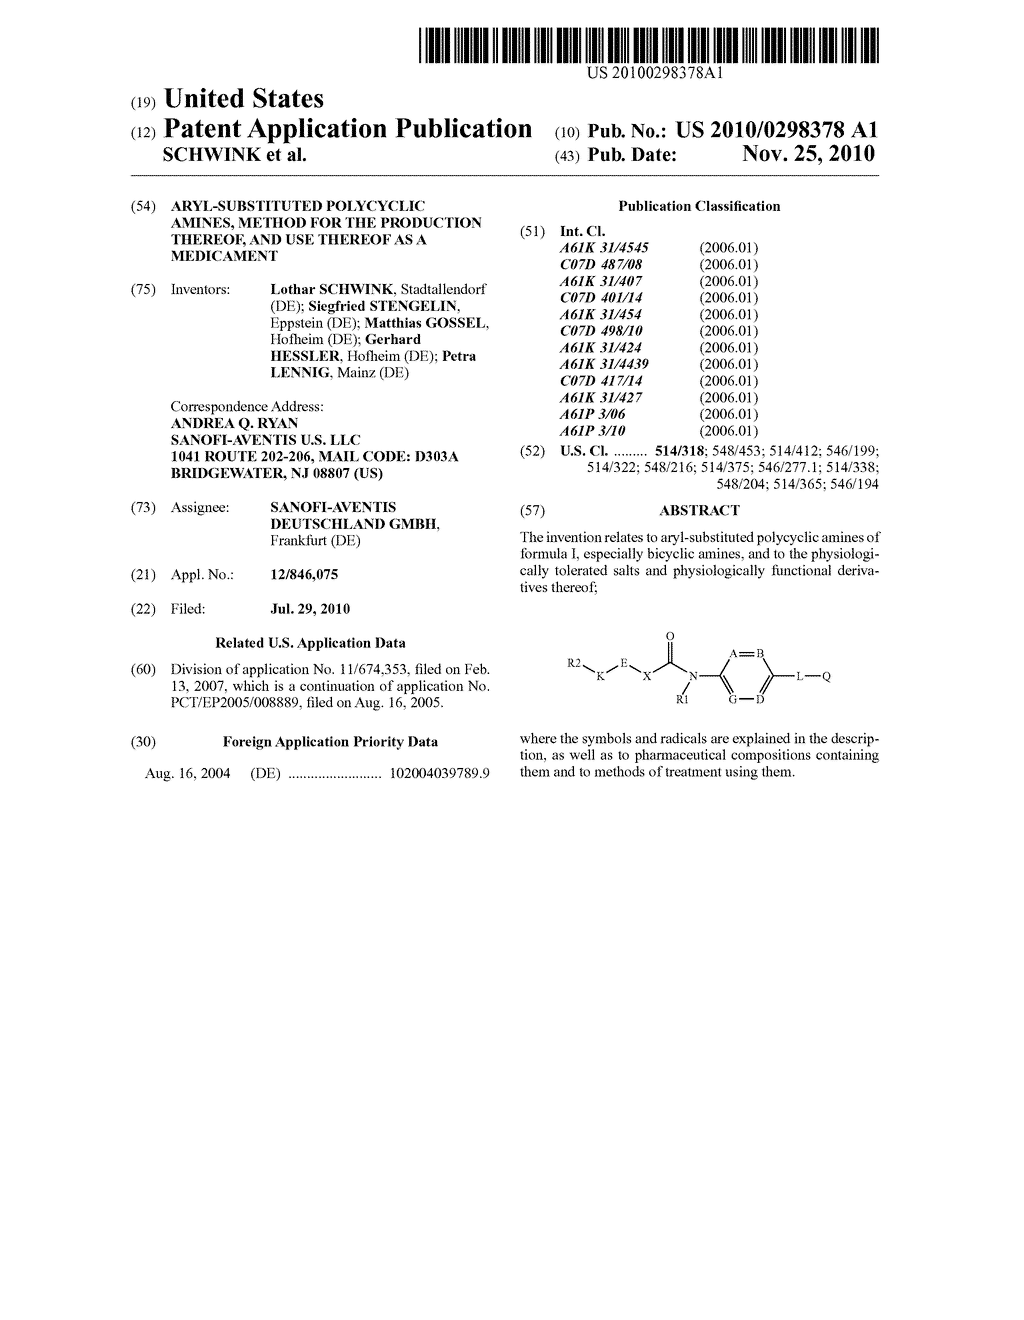 ARYL-SUBSTITUTED POLYCYCLIC AMINES, METHOD FOR THE PRODUCTION THEREOF, AND USE THEREOF AS A MEDICAMENT - diagram, schematic, and image 01